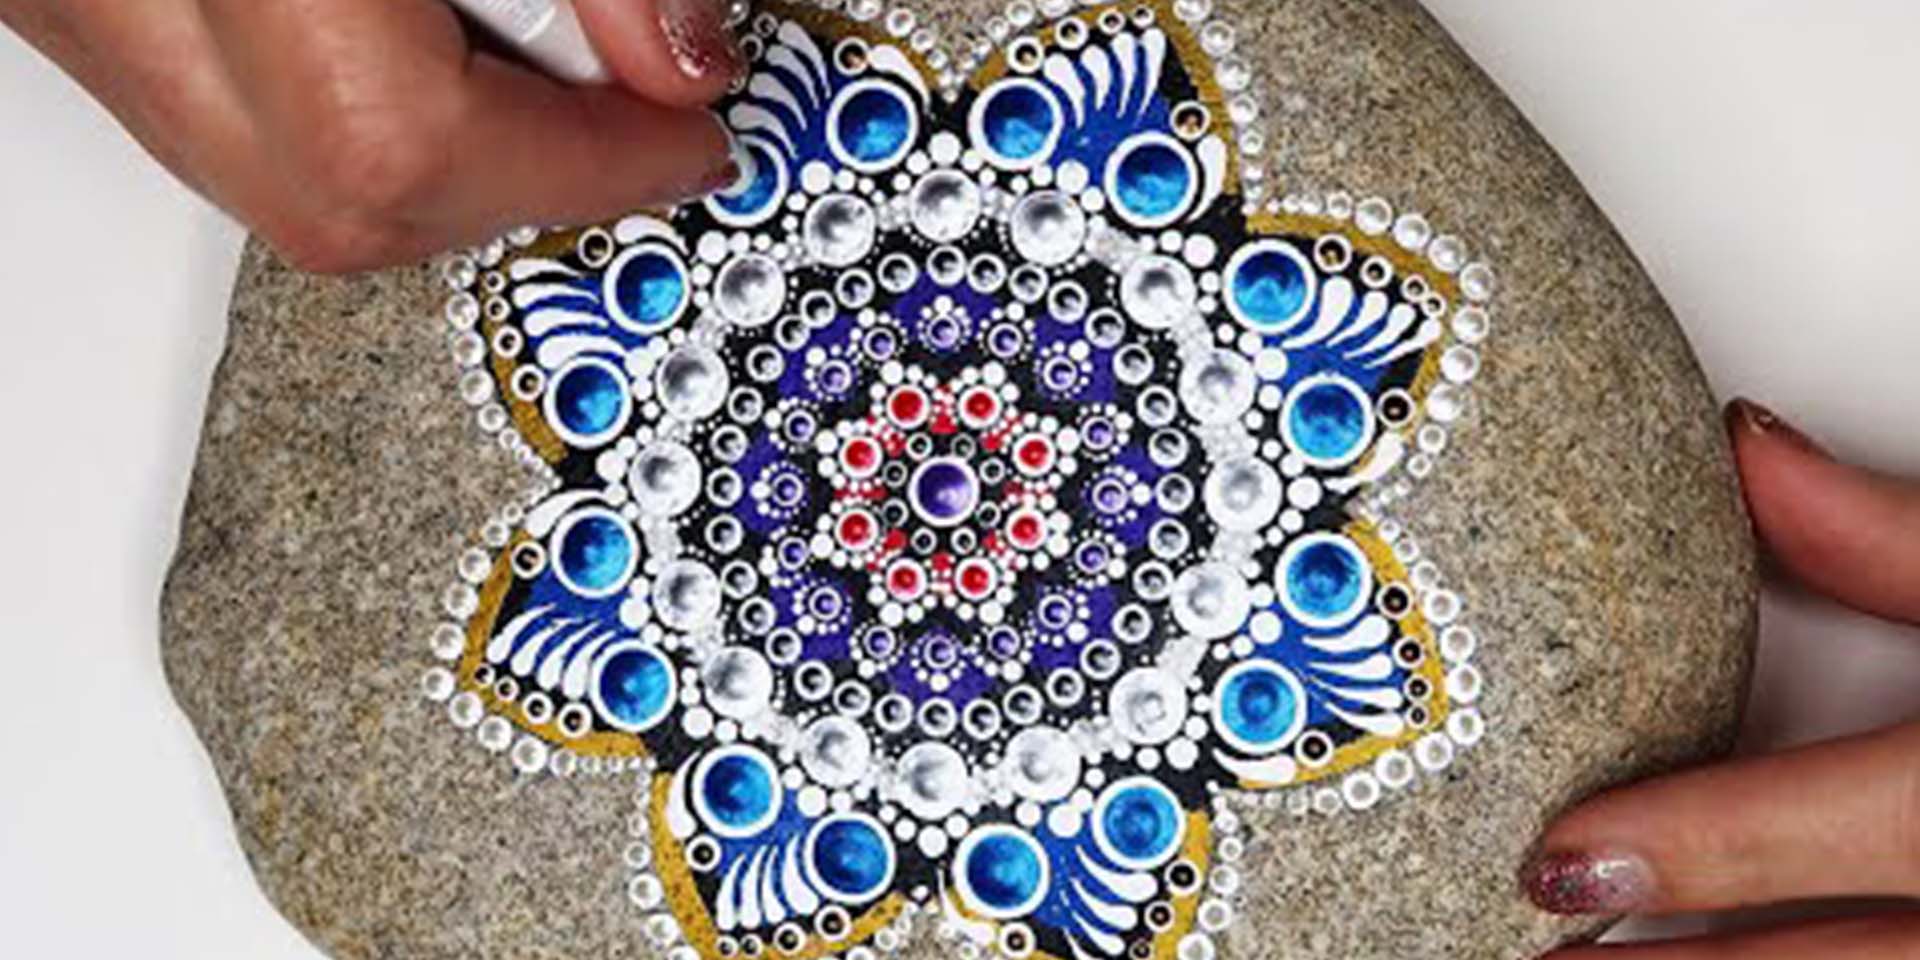 How to Mandala Pattern with a Stencil "Sky Dance" White & Blue Rock Dot Painting Time Lapse w Music